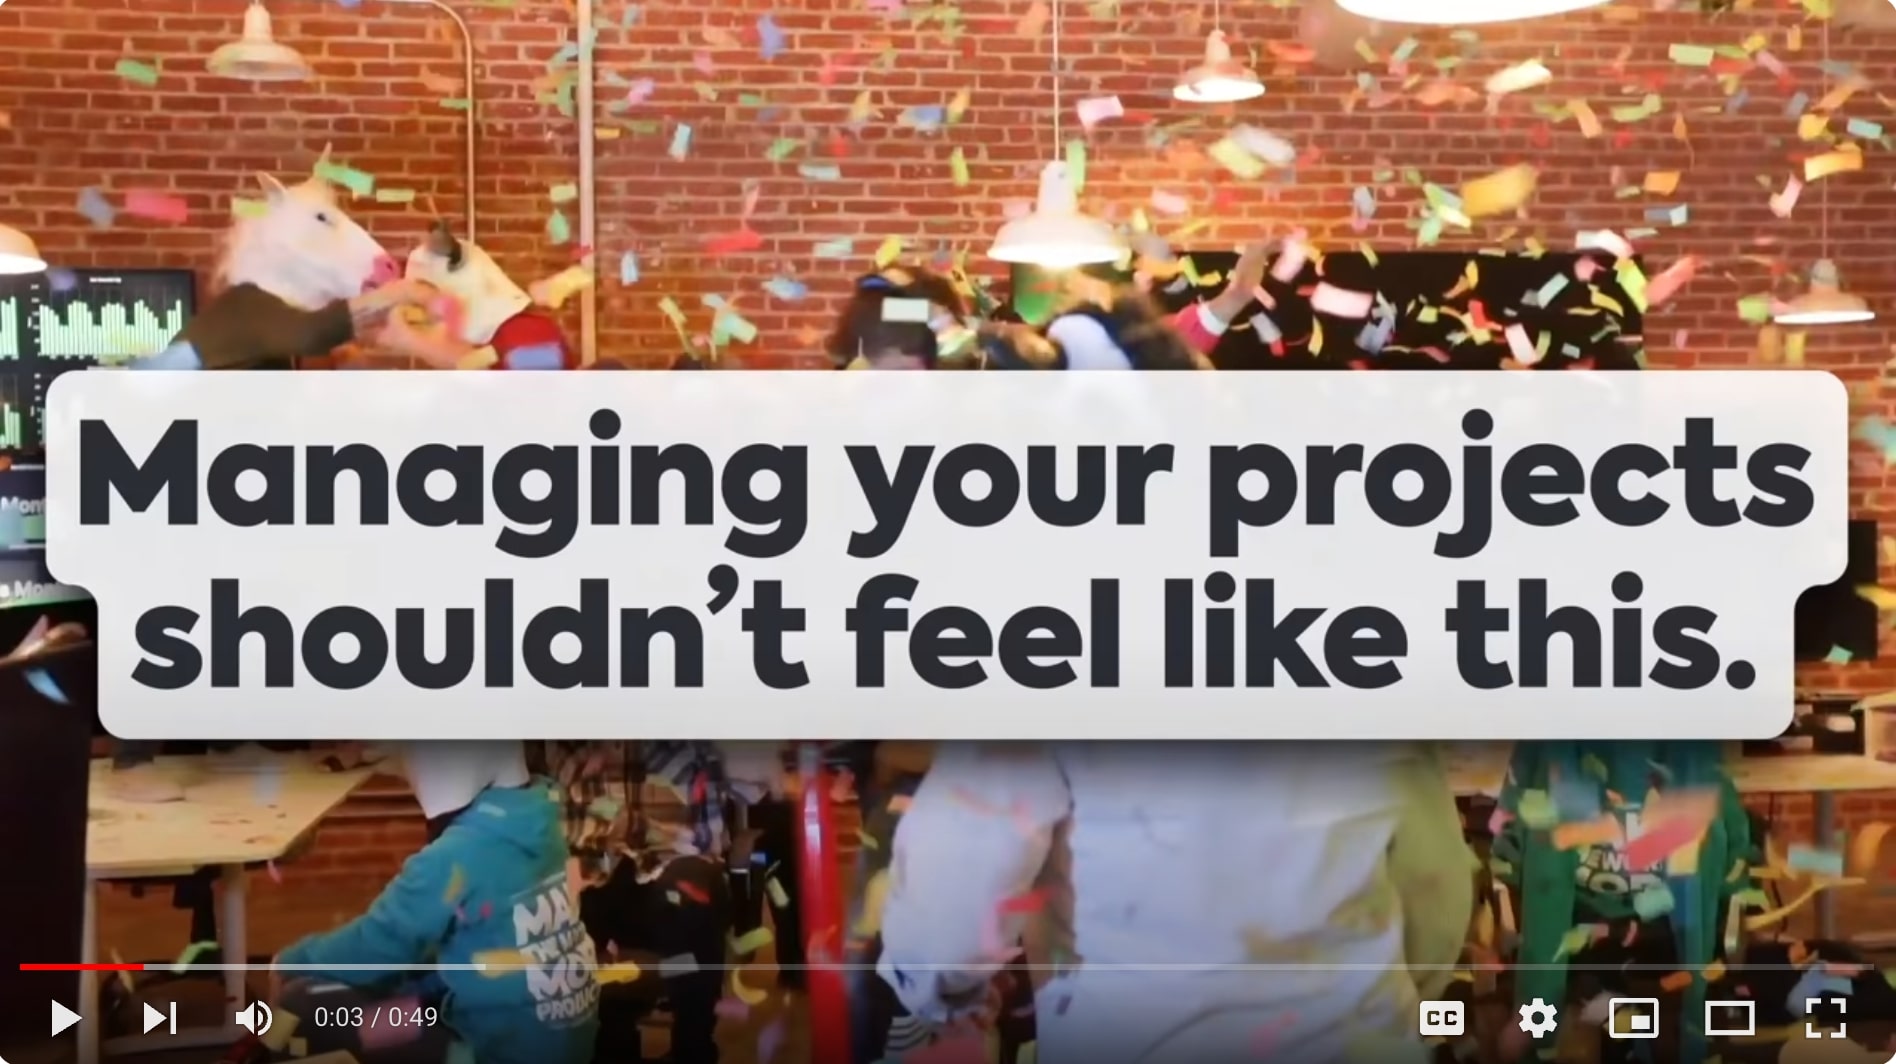 ClickUp's video ad begins with "Managing your projects shouldn't feel like this." message